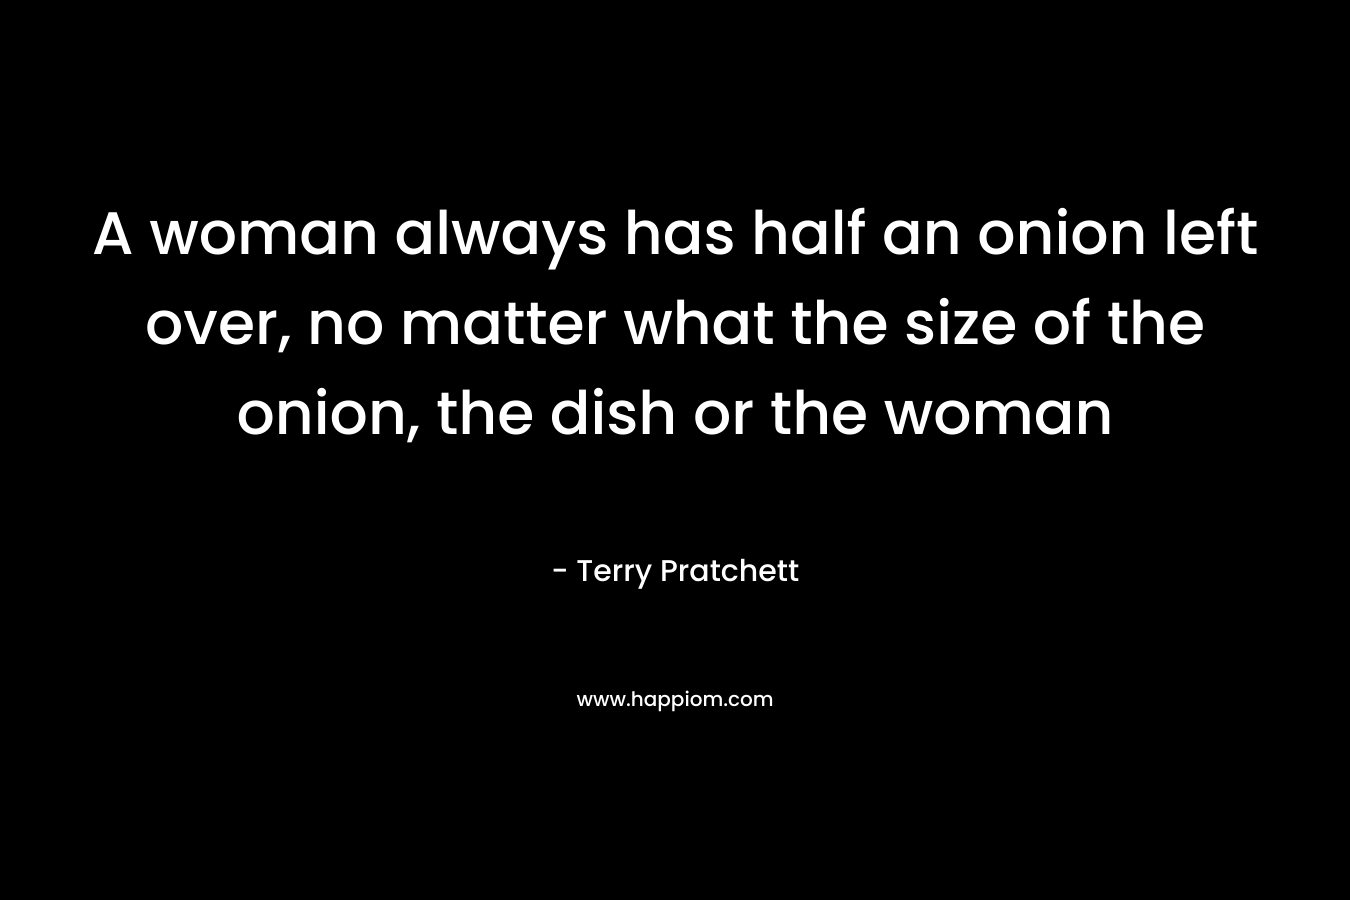 A woman always has half an onion left over, no matter what the size of the onion, the dish or the woman